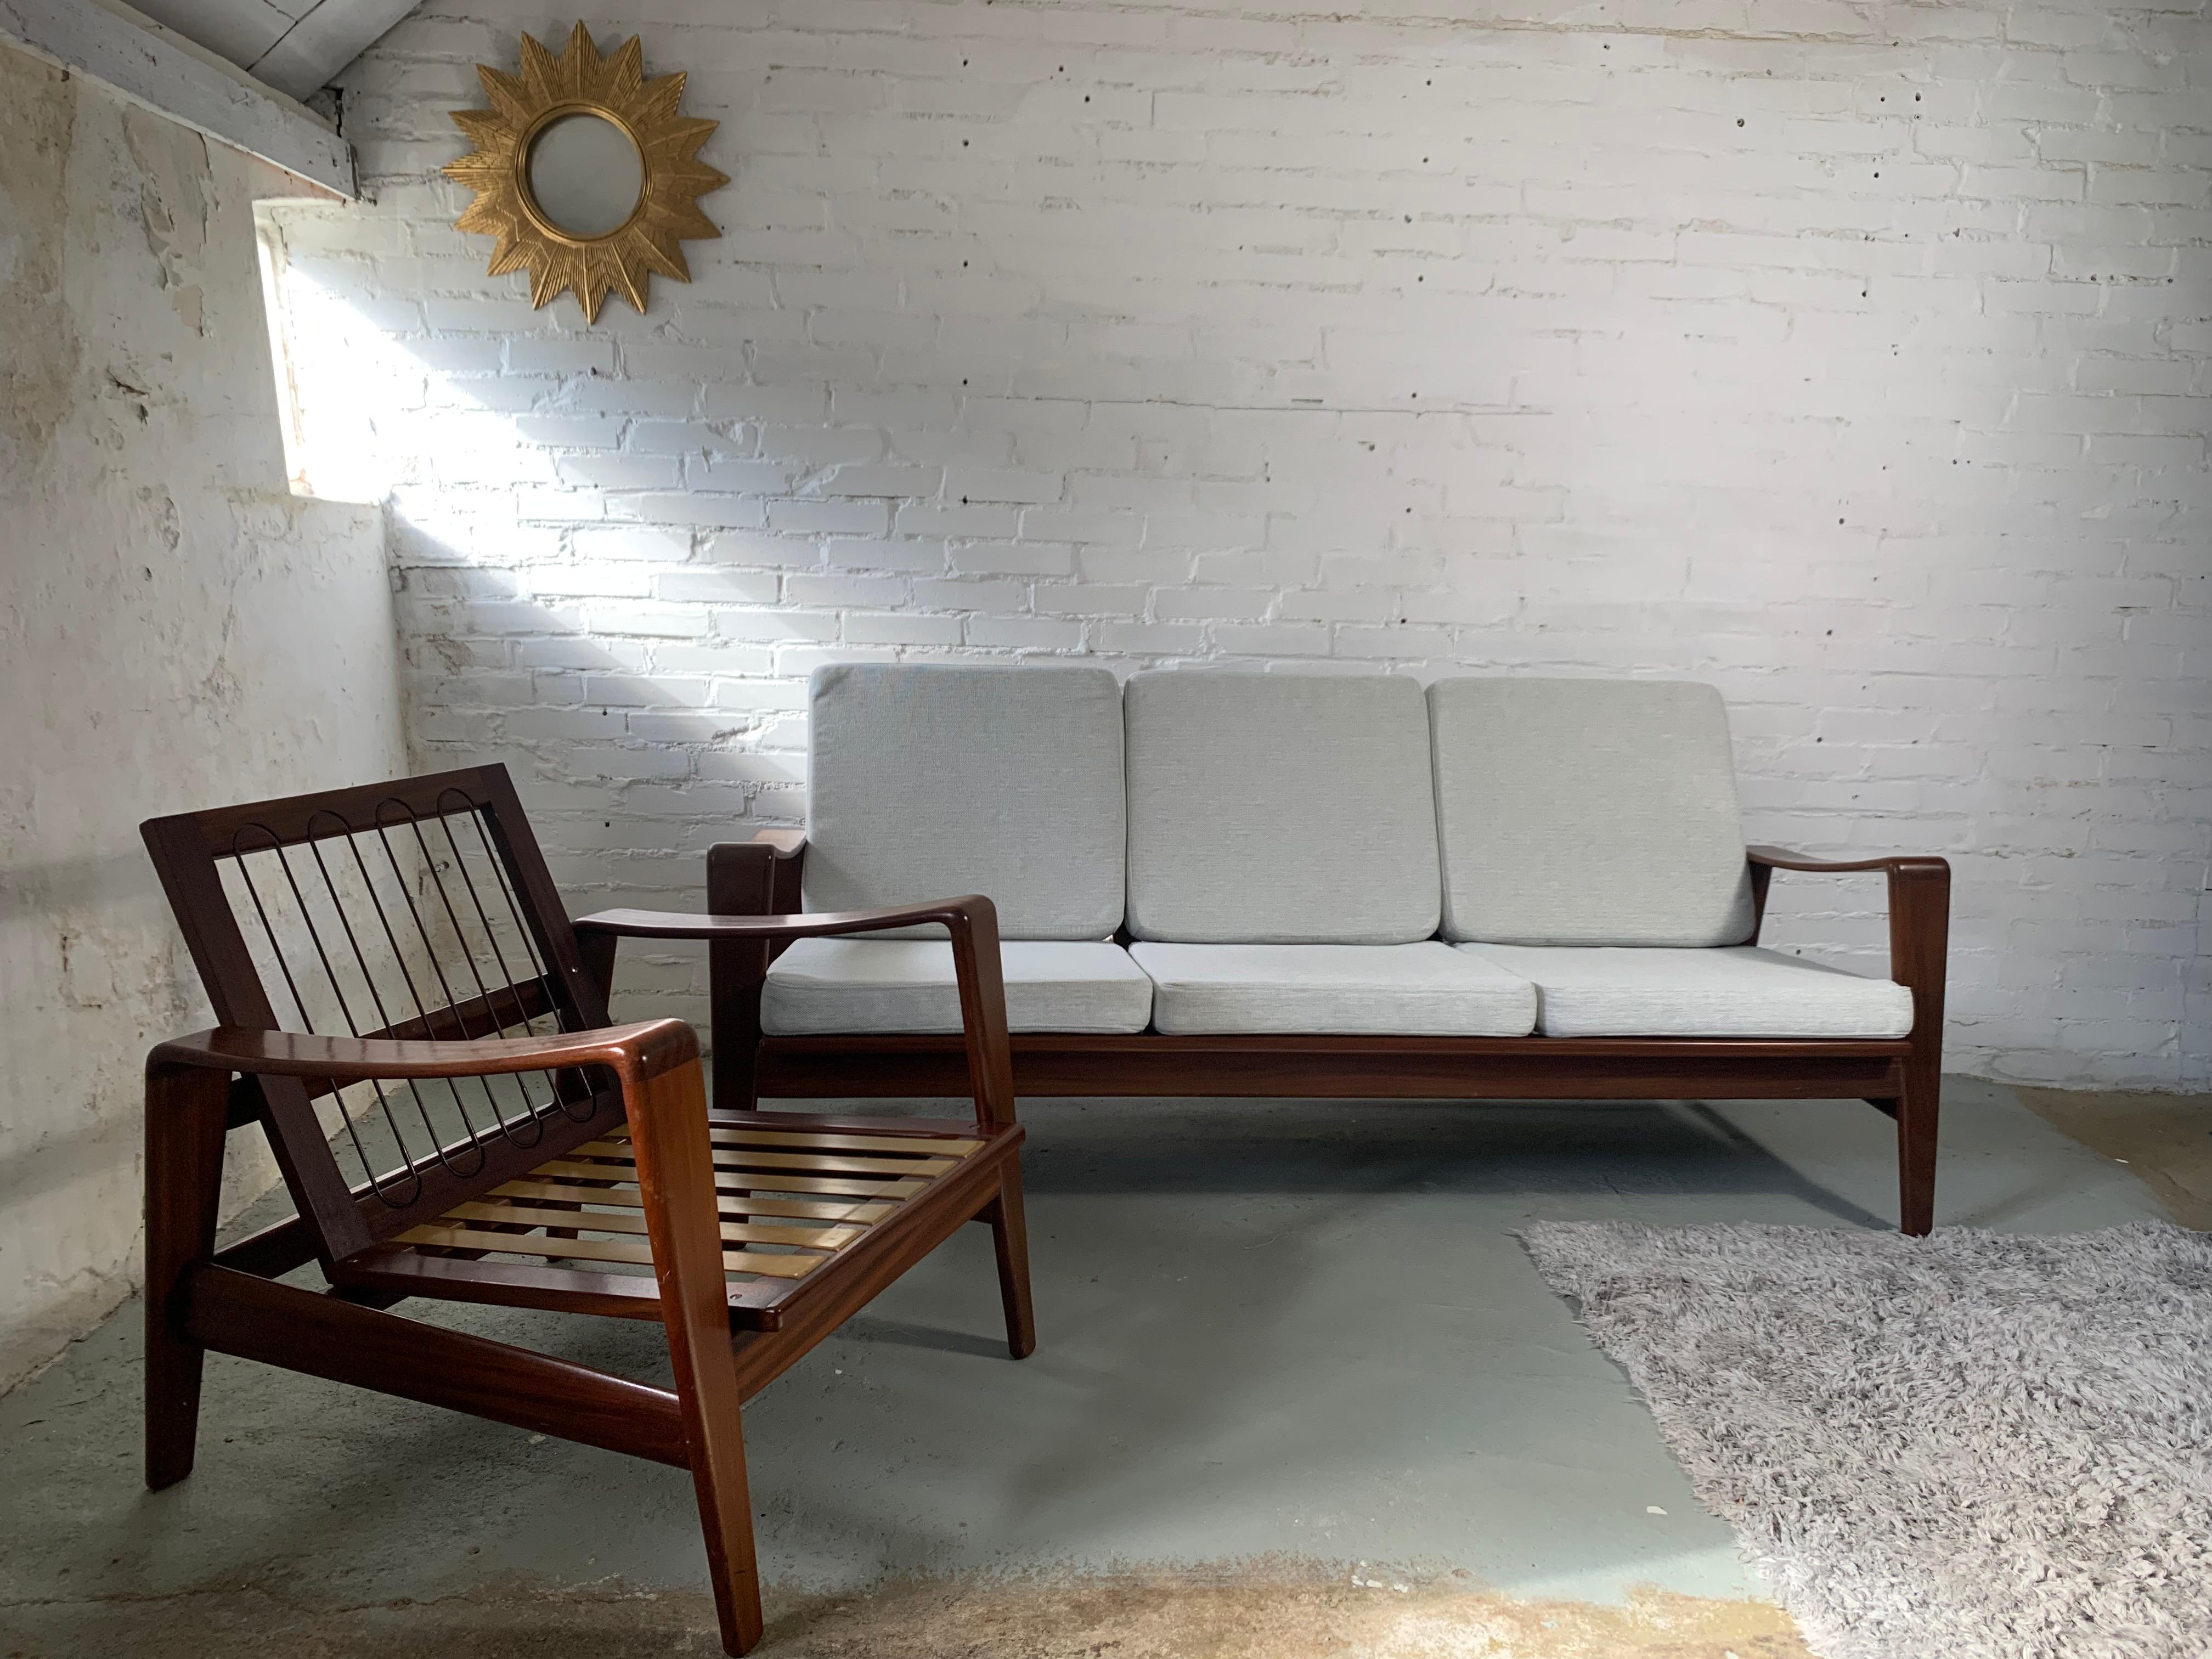 Set of 3-seats sofa and pair of easy chairs model no. 35 designed by Arne Wahl Iversen, manufactured by Komfort, Denmark, 1960. These comfortable furniture have solid teak wooden frames and white upholstered cushions. Beutifull classic Mid-Century